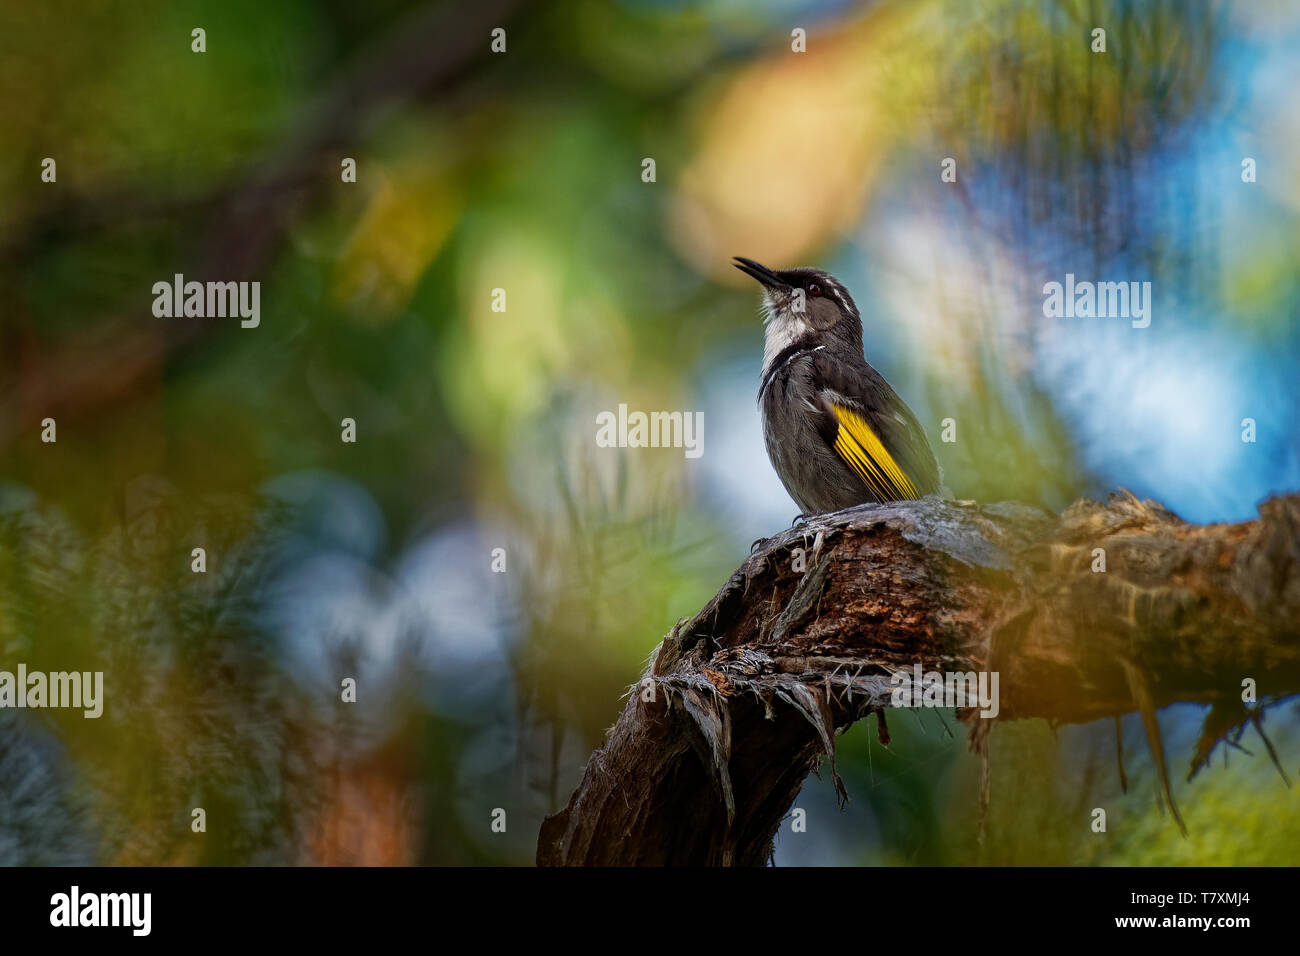 Crescent Honeyeater - Phylidonyris pyrrhopterus on the branch in the Tasmanian forest in Australia. Stock Photo